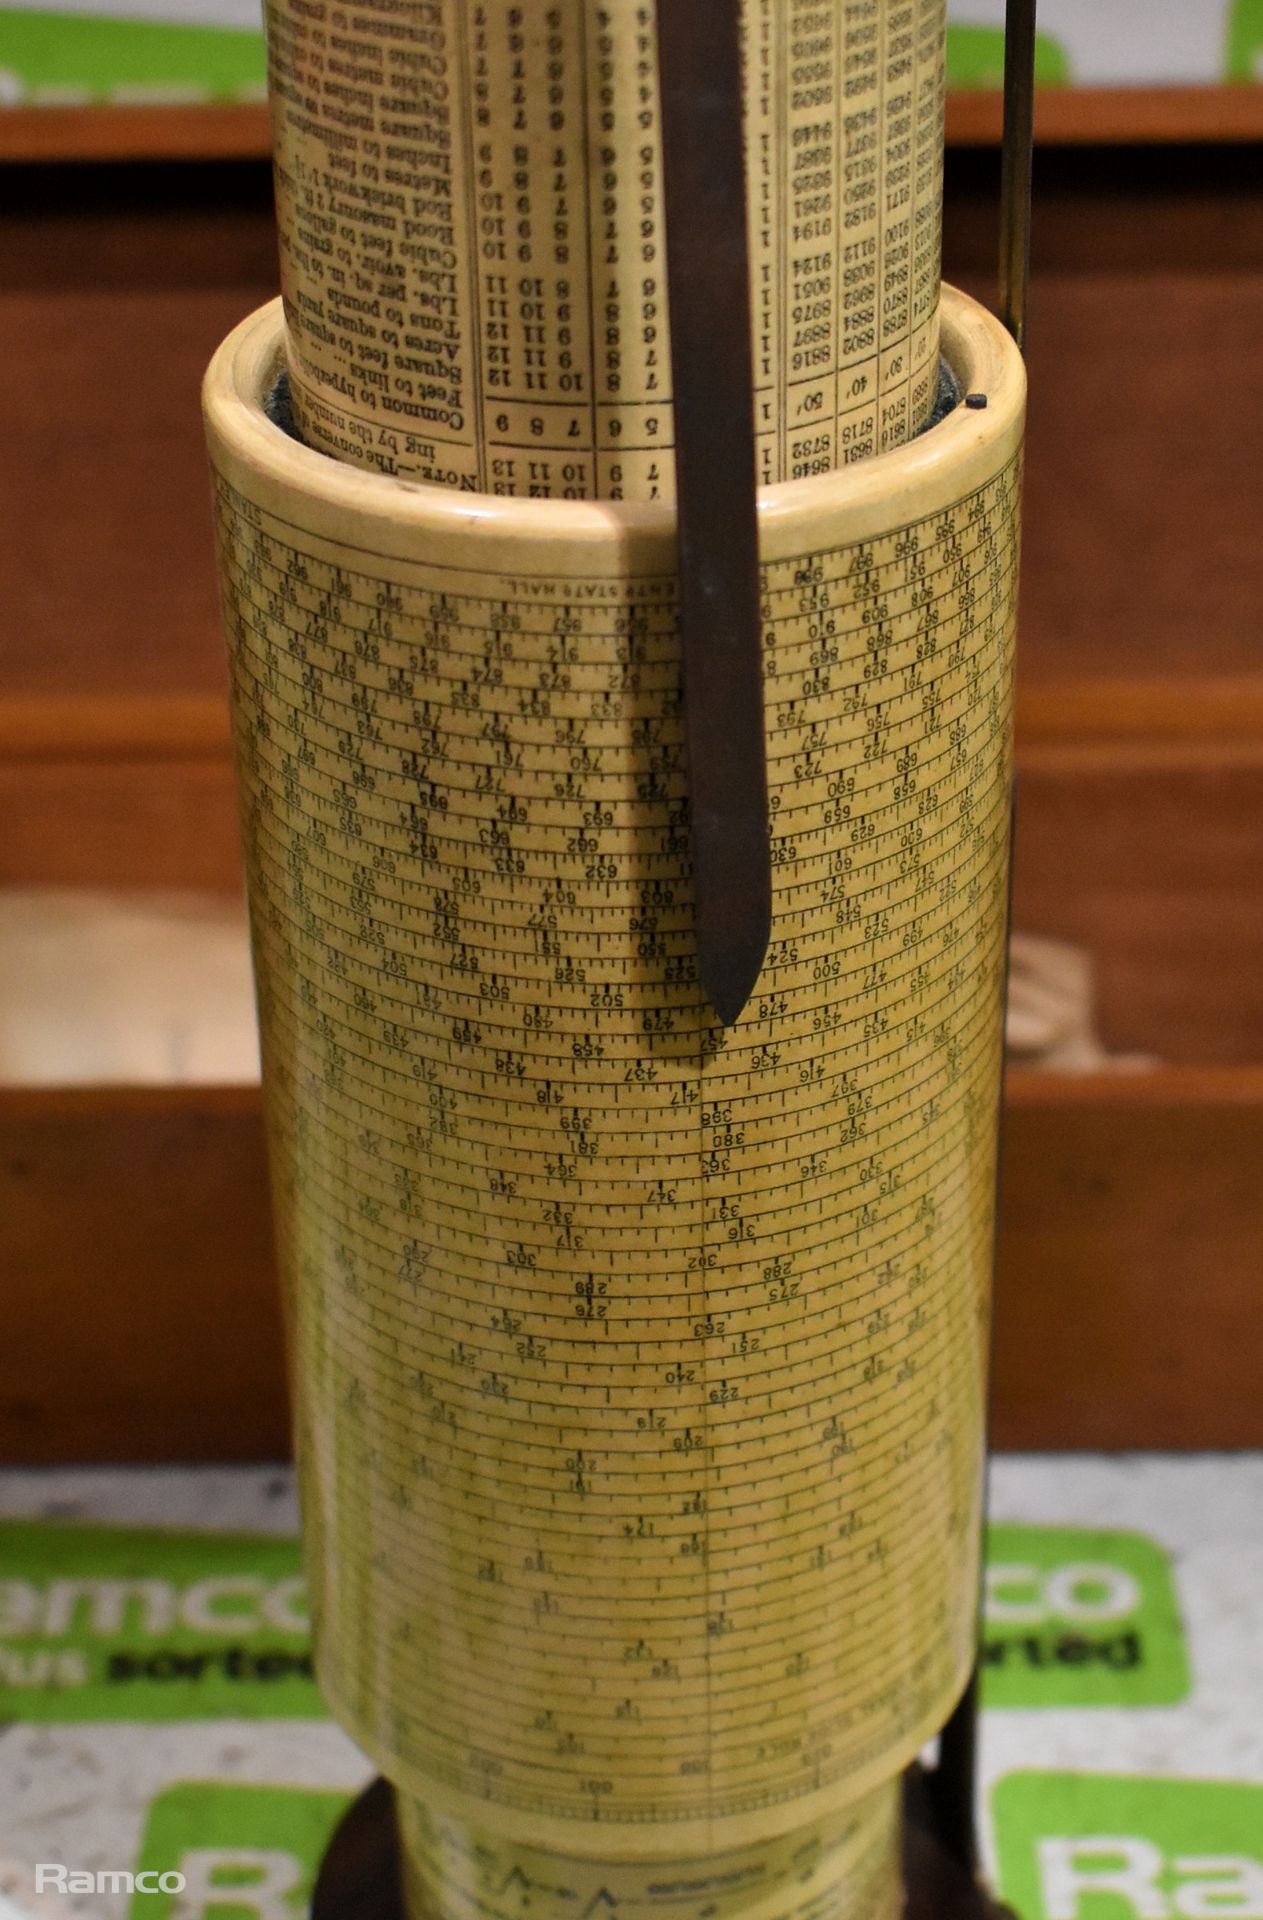 Fuller's cylindrical slide rule / calculator in wooden box - Image 3 of 9